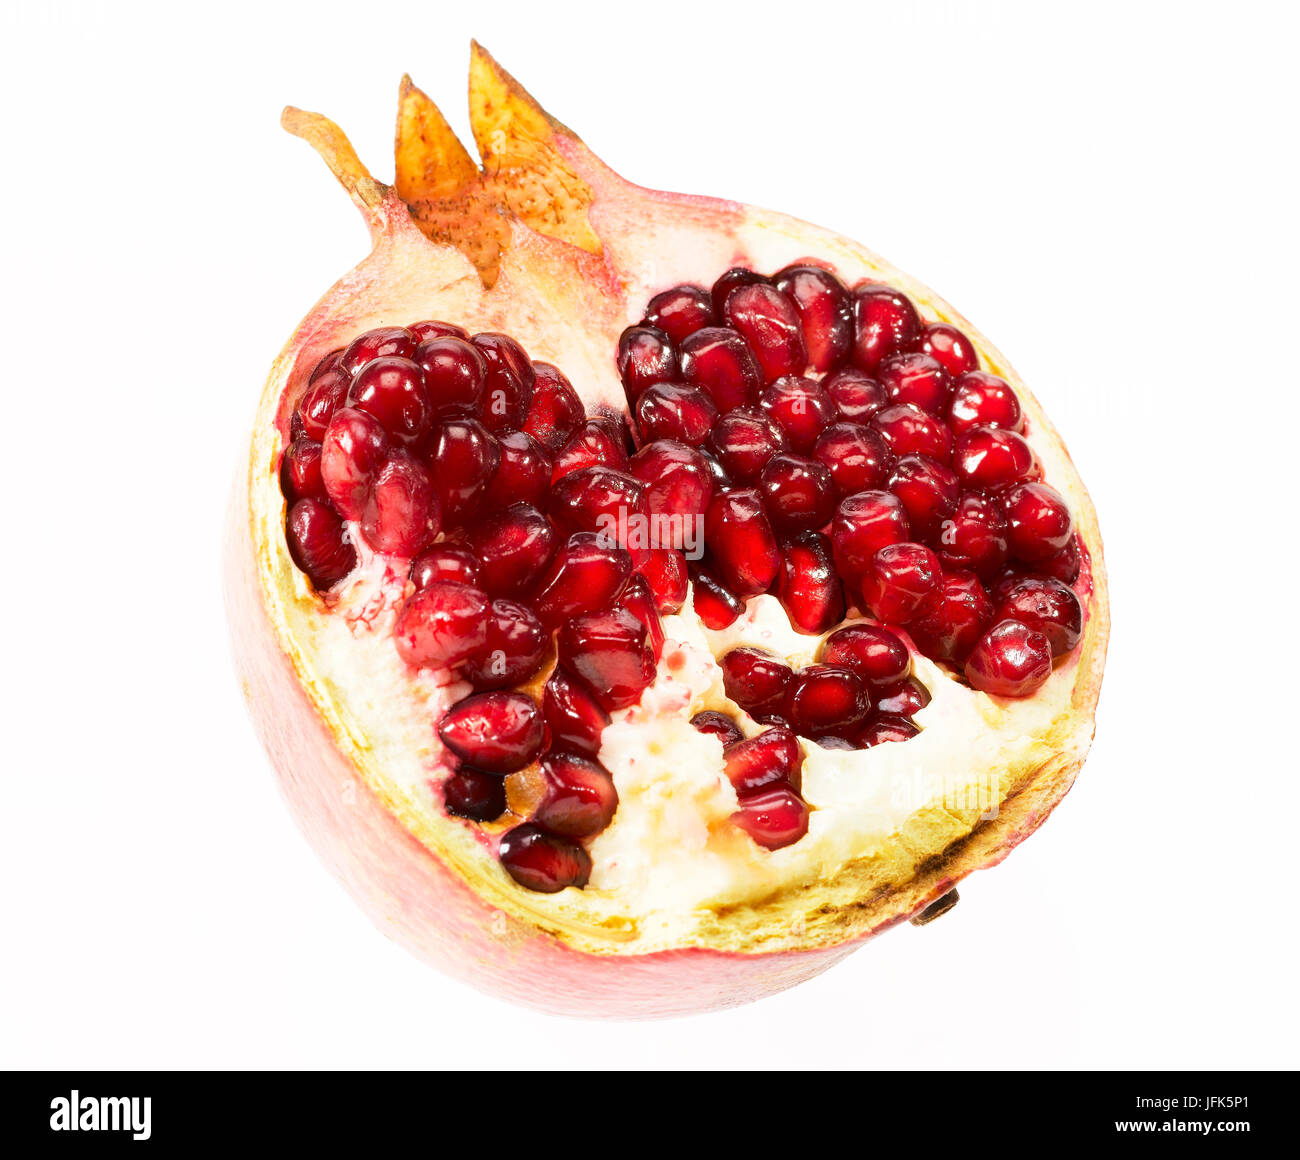 Pomegranate with seeds Stock Photo